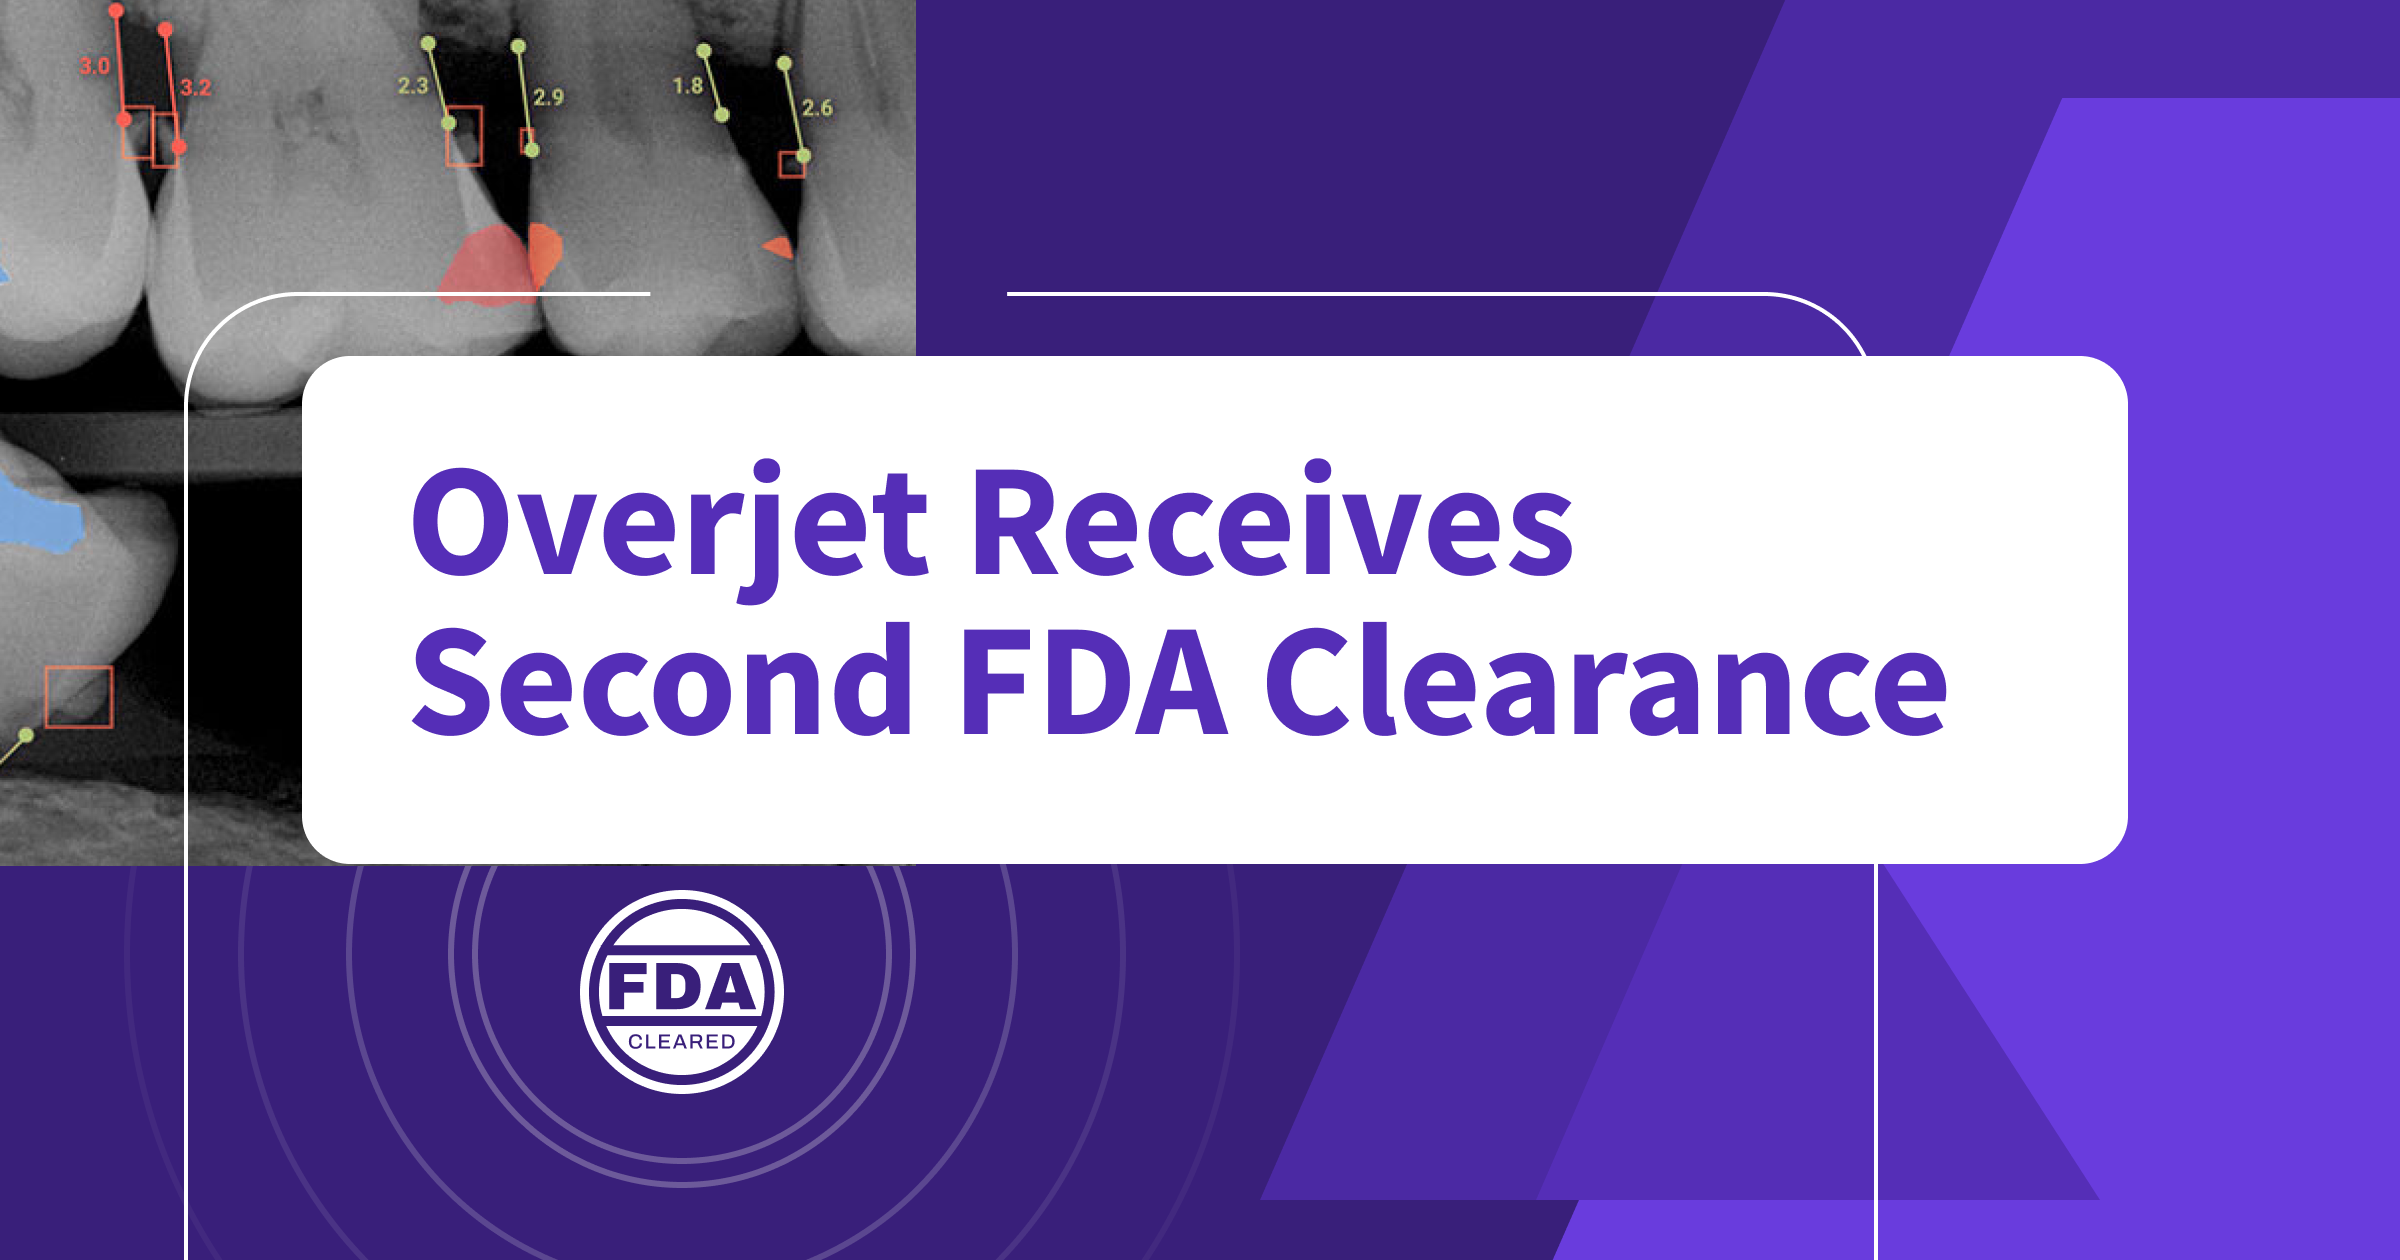 Overjet Receives Second FDA Clearance